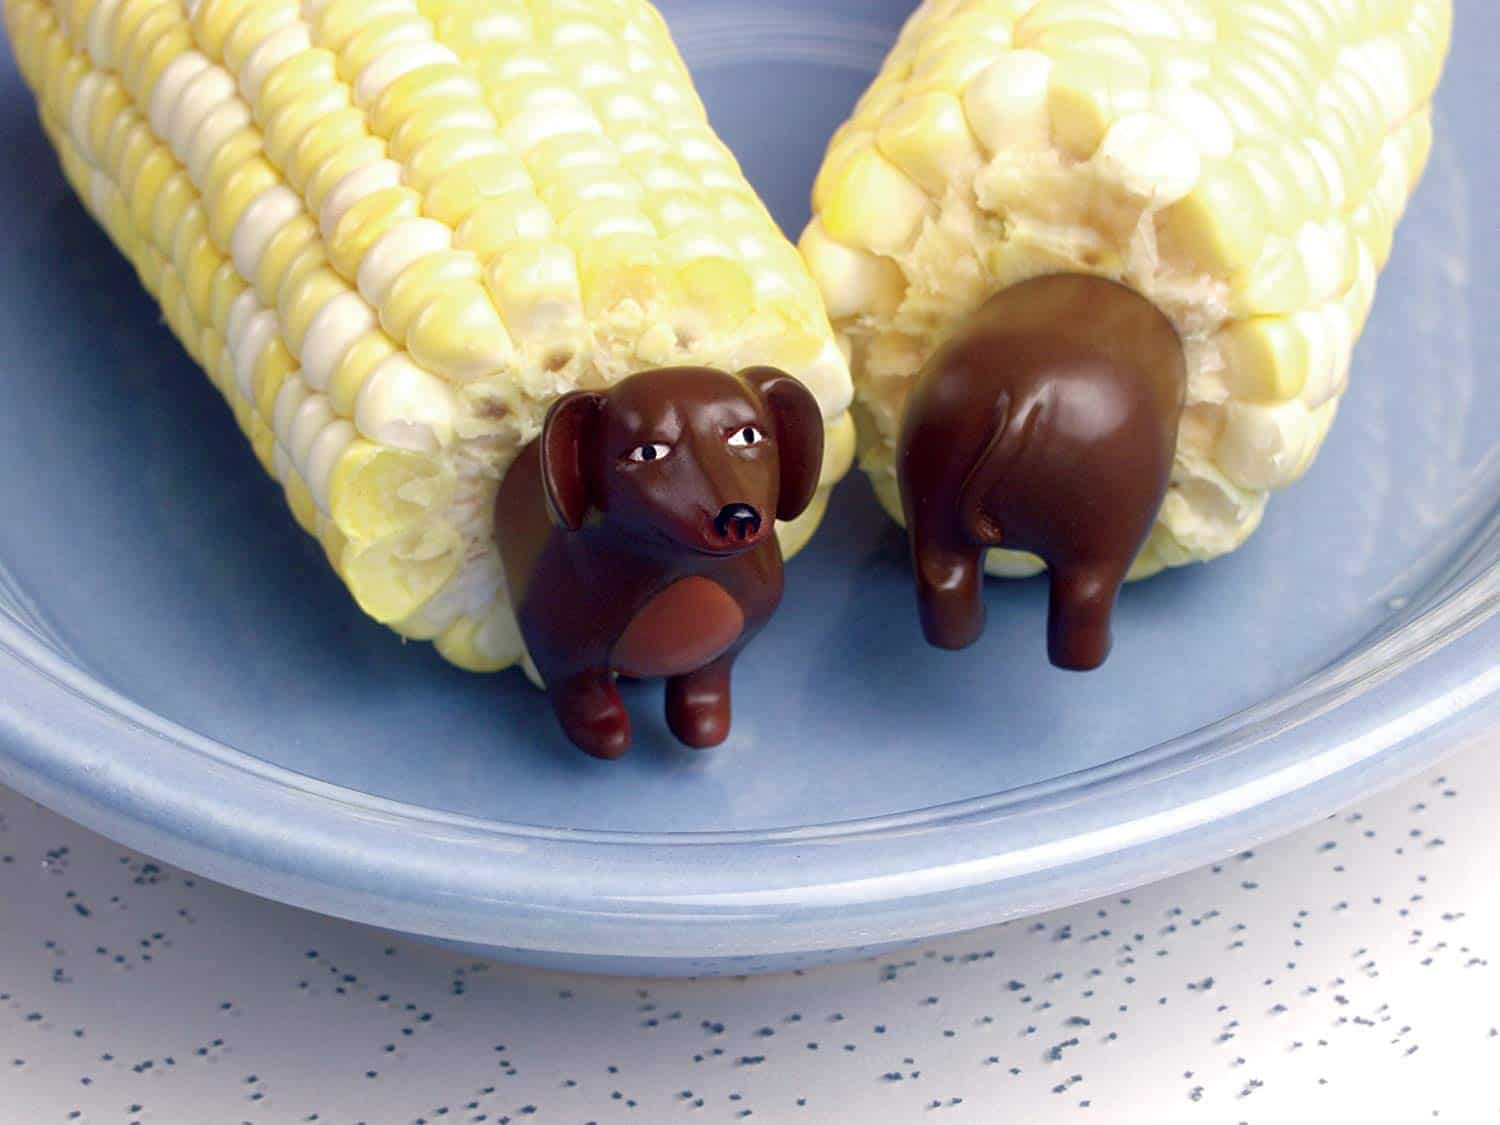 12 Unique Corn Cob Holders For Your Outdoor Kitchen